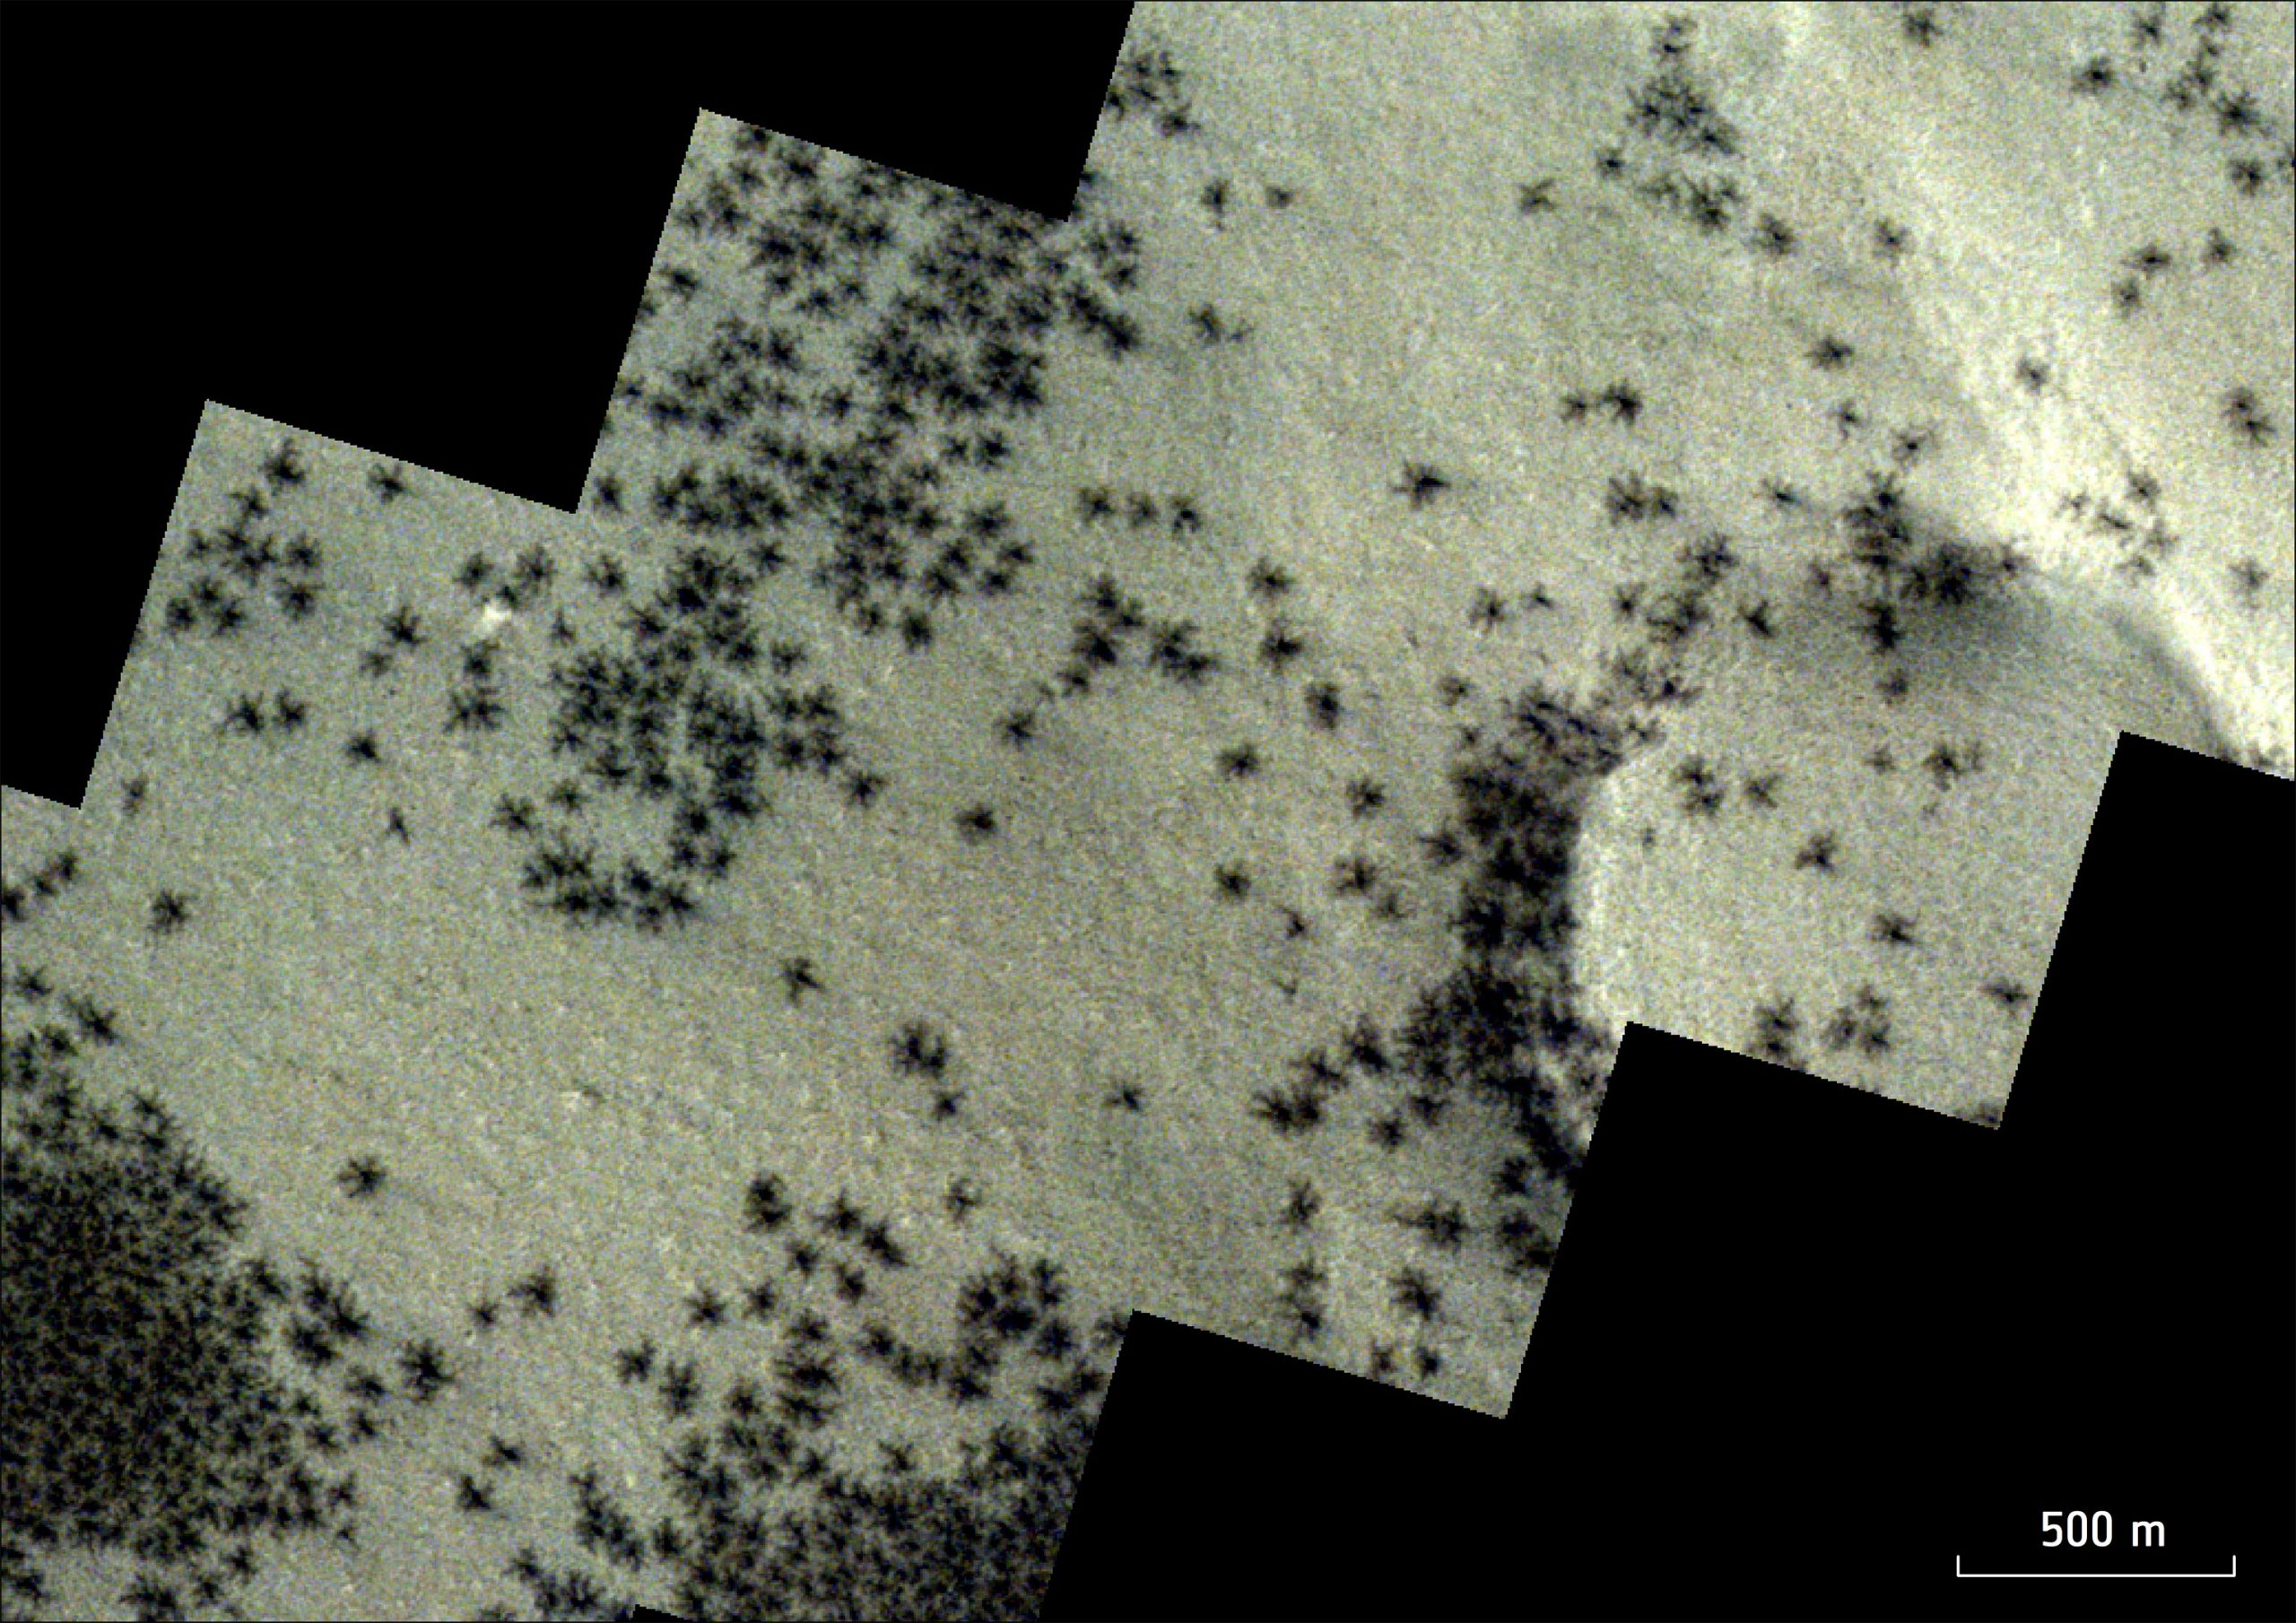 Mars Express discovers mysterious Martian spiders